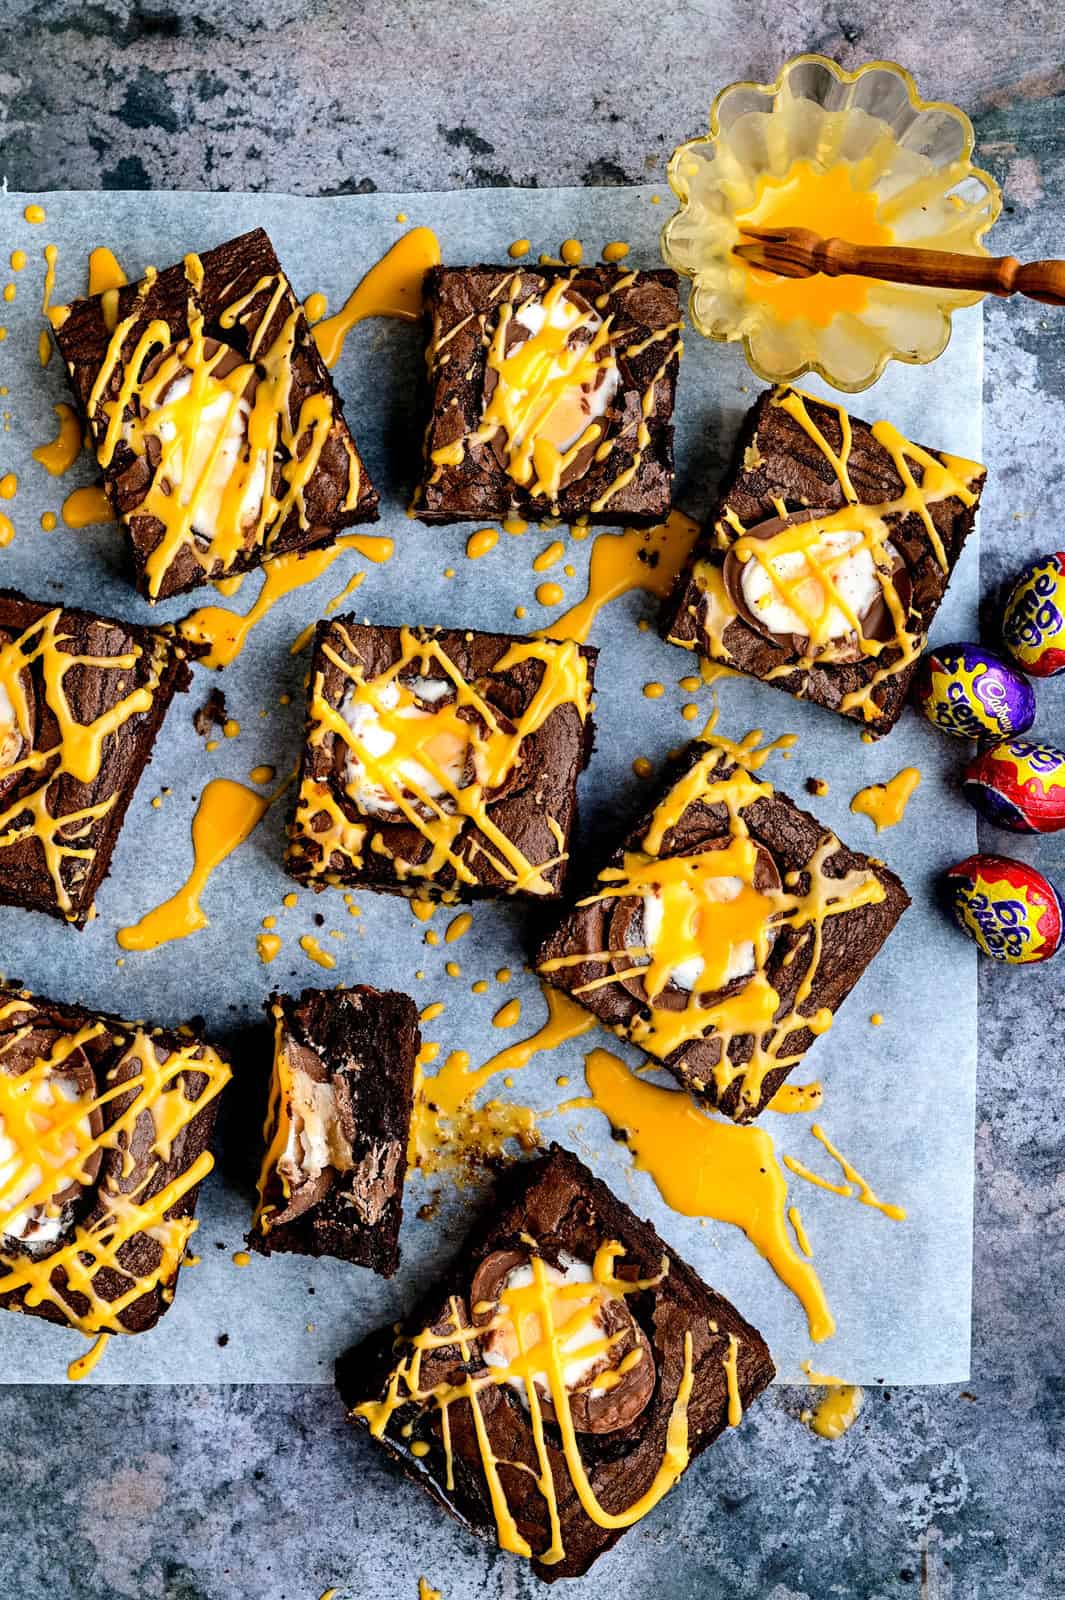 Overhead view of sliced Cadbury's Creme Egg brownies drizzled with yellow icing